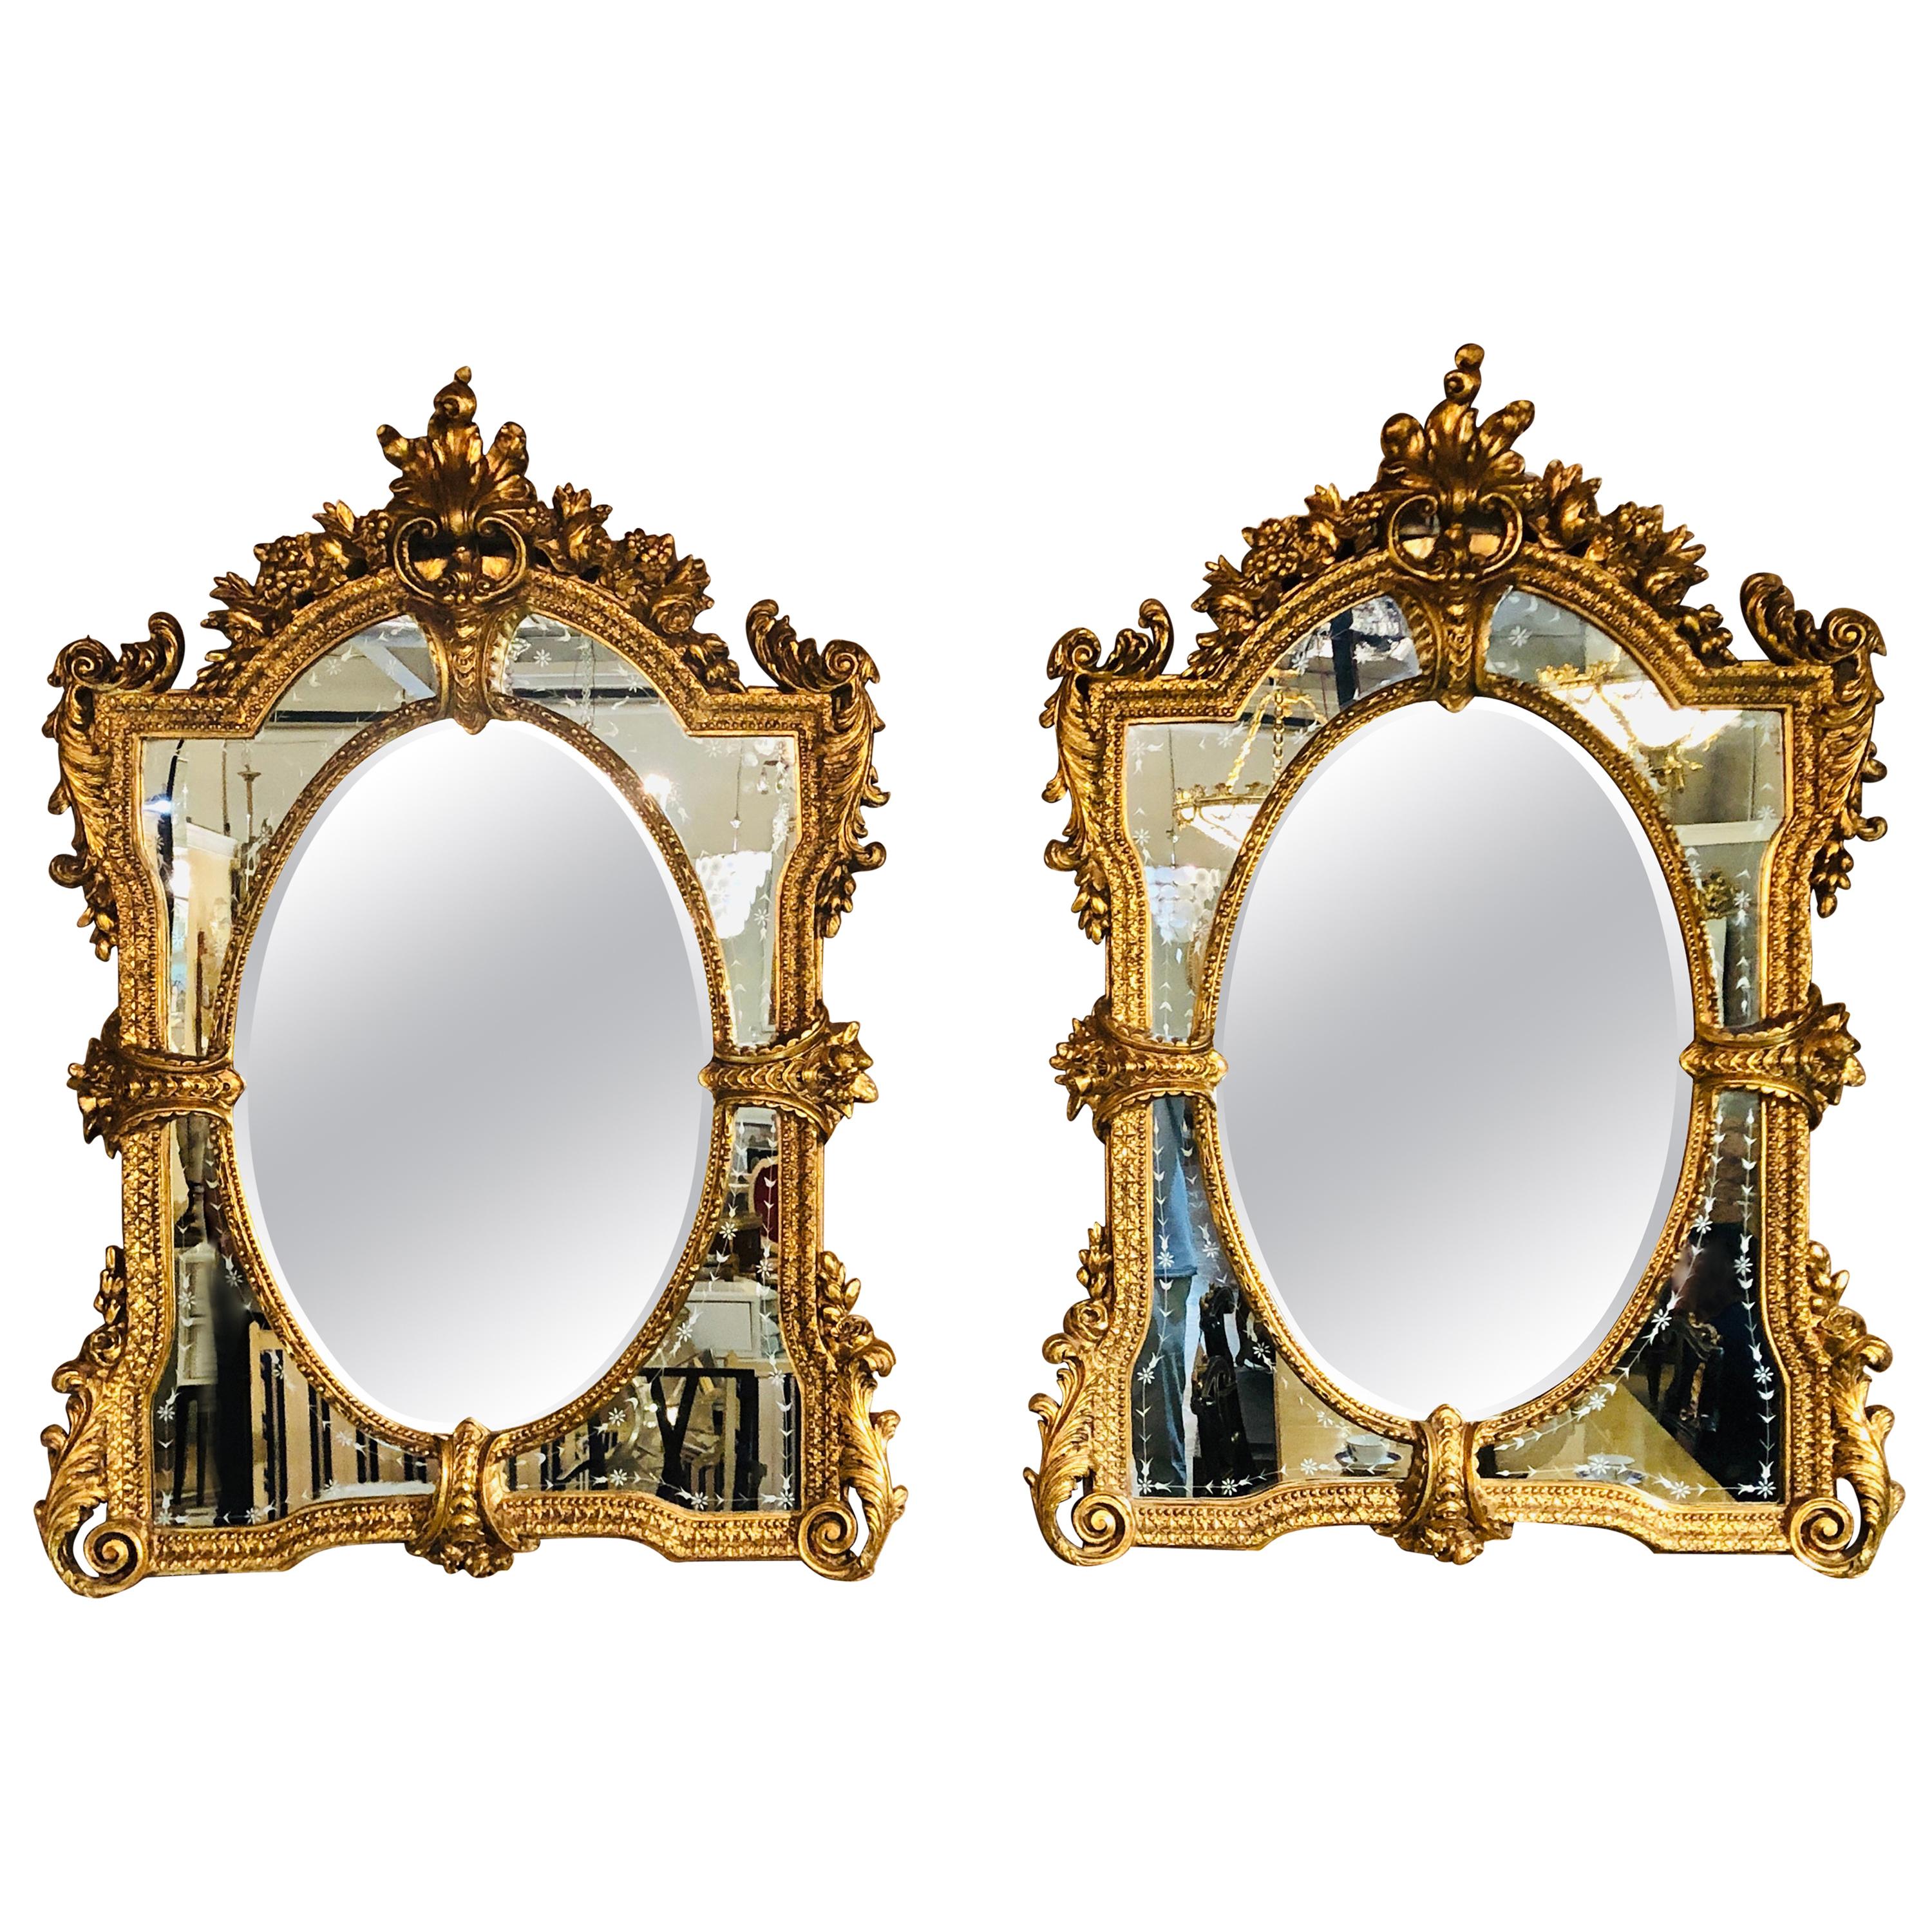 Pair of Monumental Venetian Gilt Carved Framed Etched Glass Wall/Console Mirrors